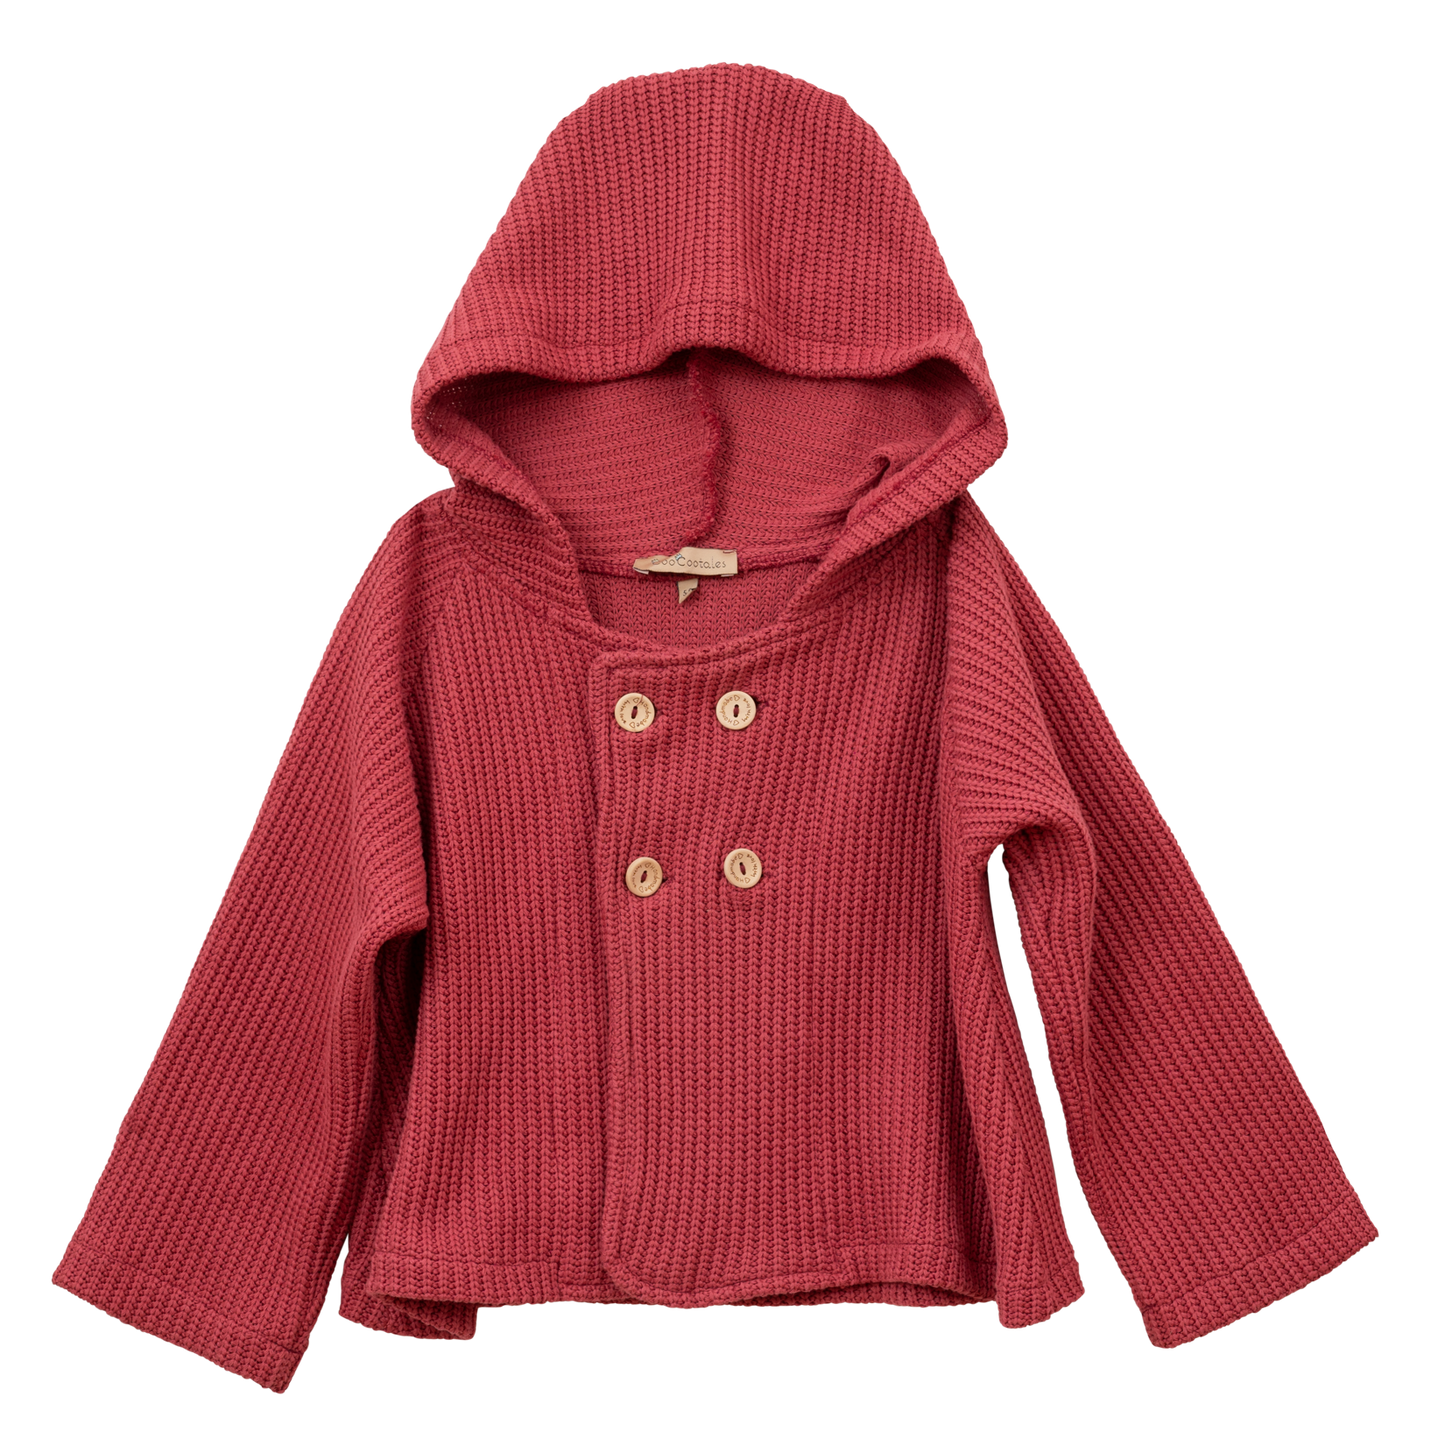 Puce Planet Girl Jacket - CooCootales